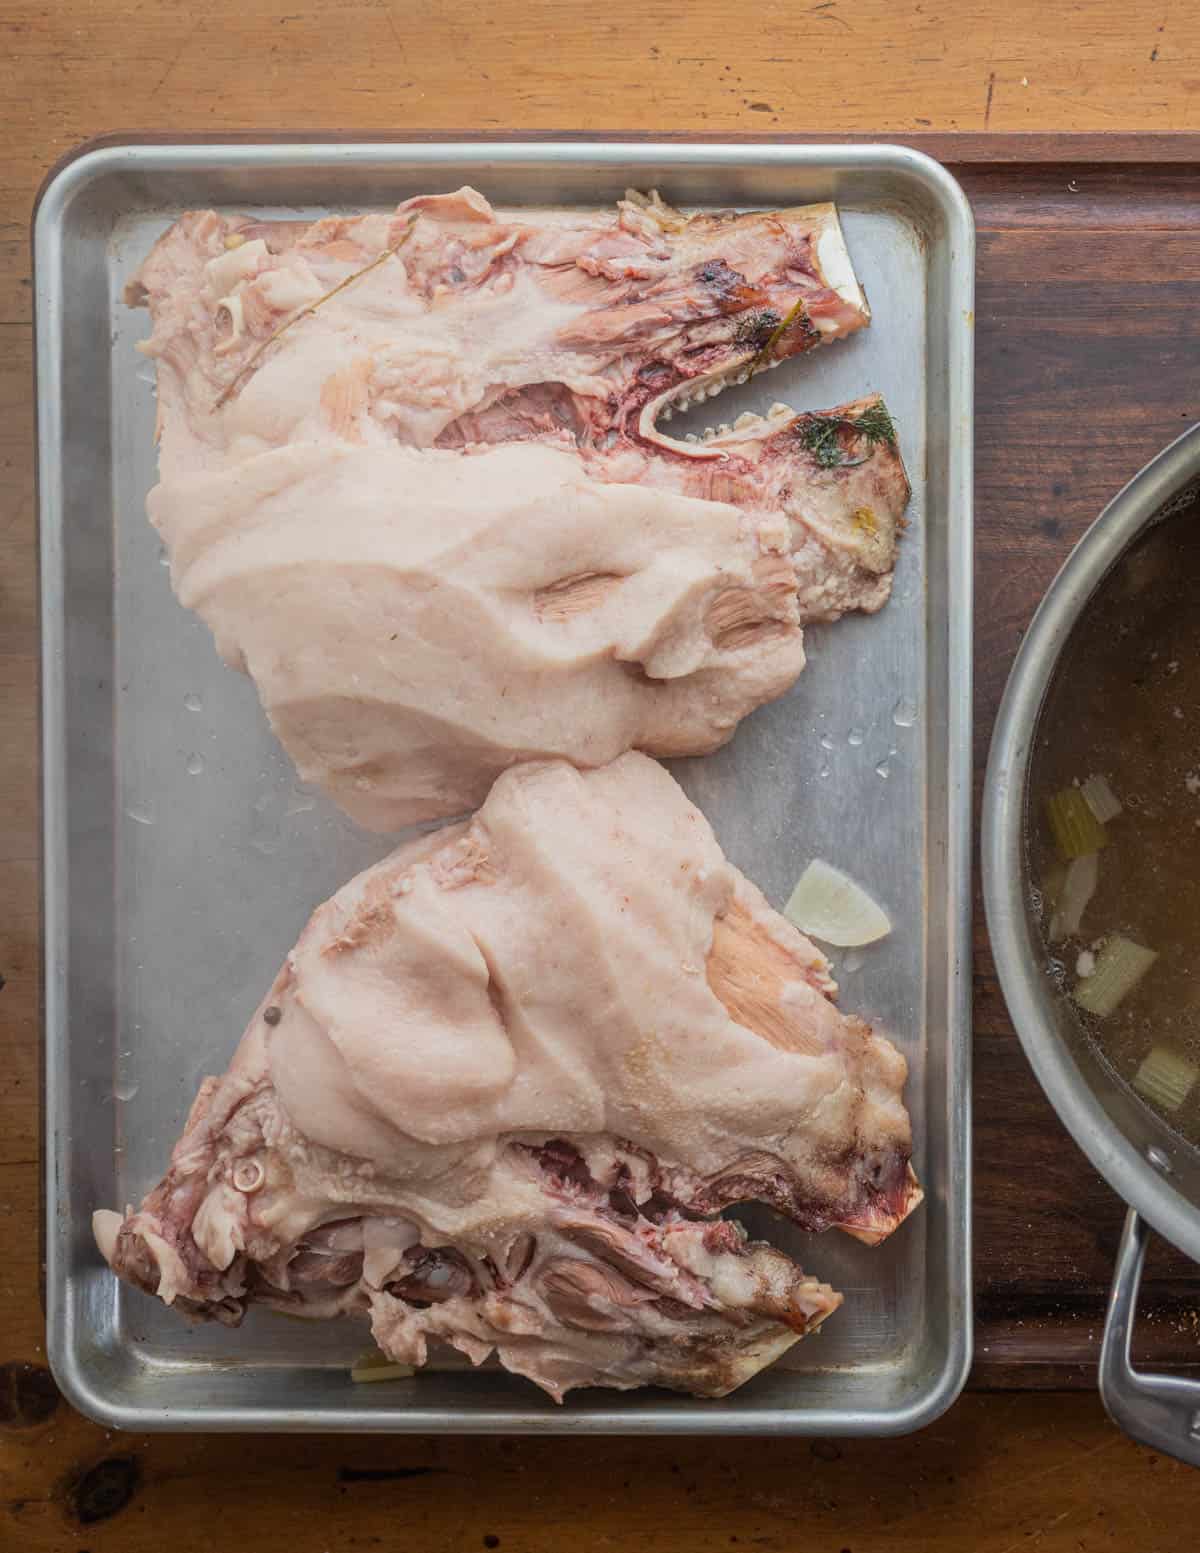 Two cooked pig head halves on a baking sheet. 